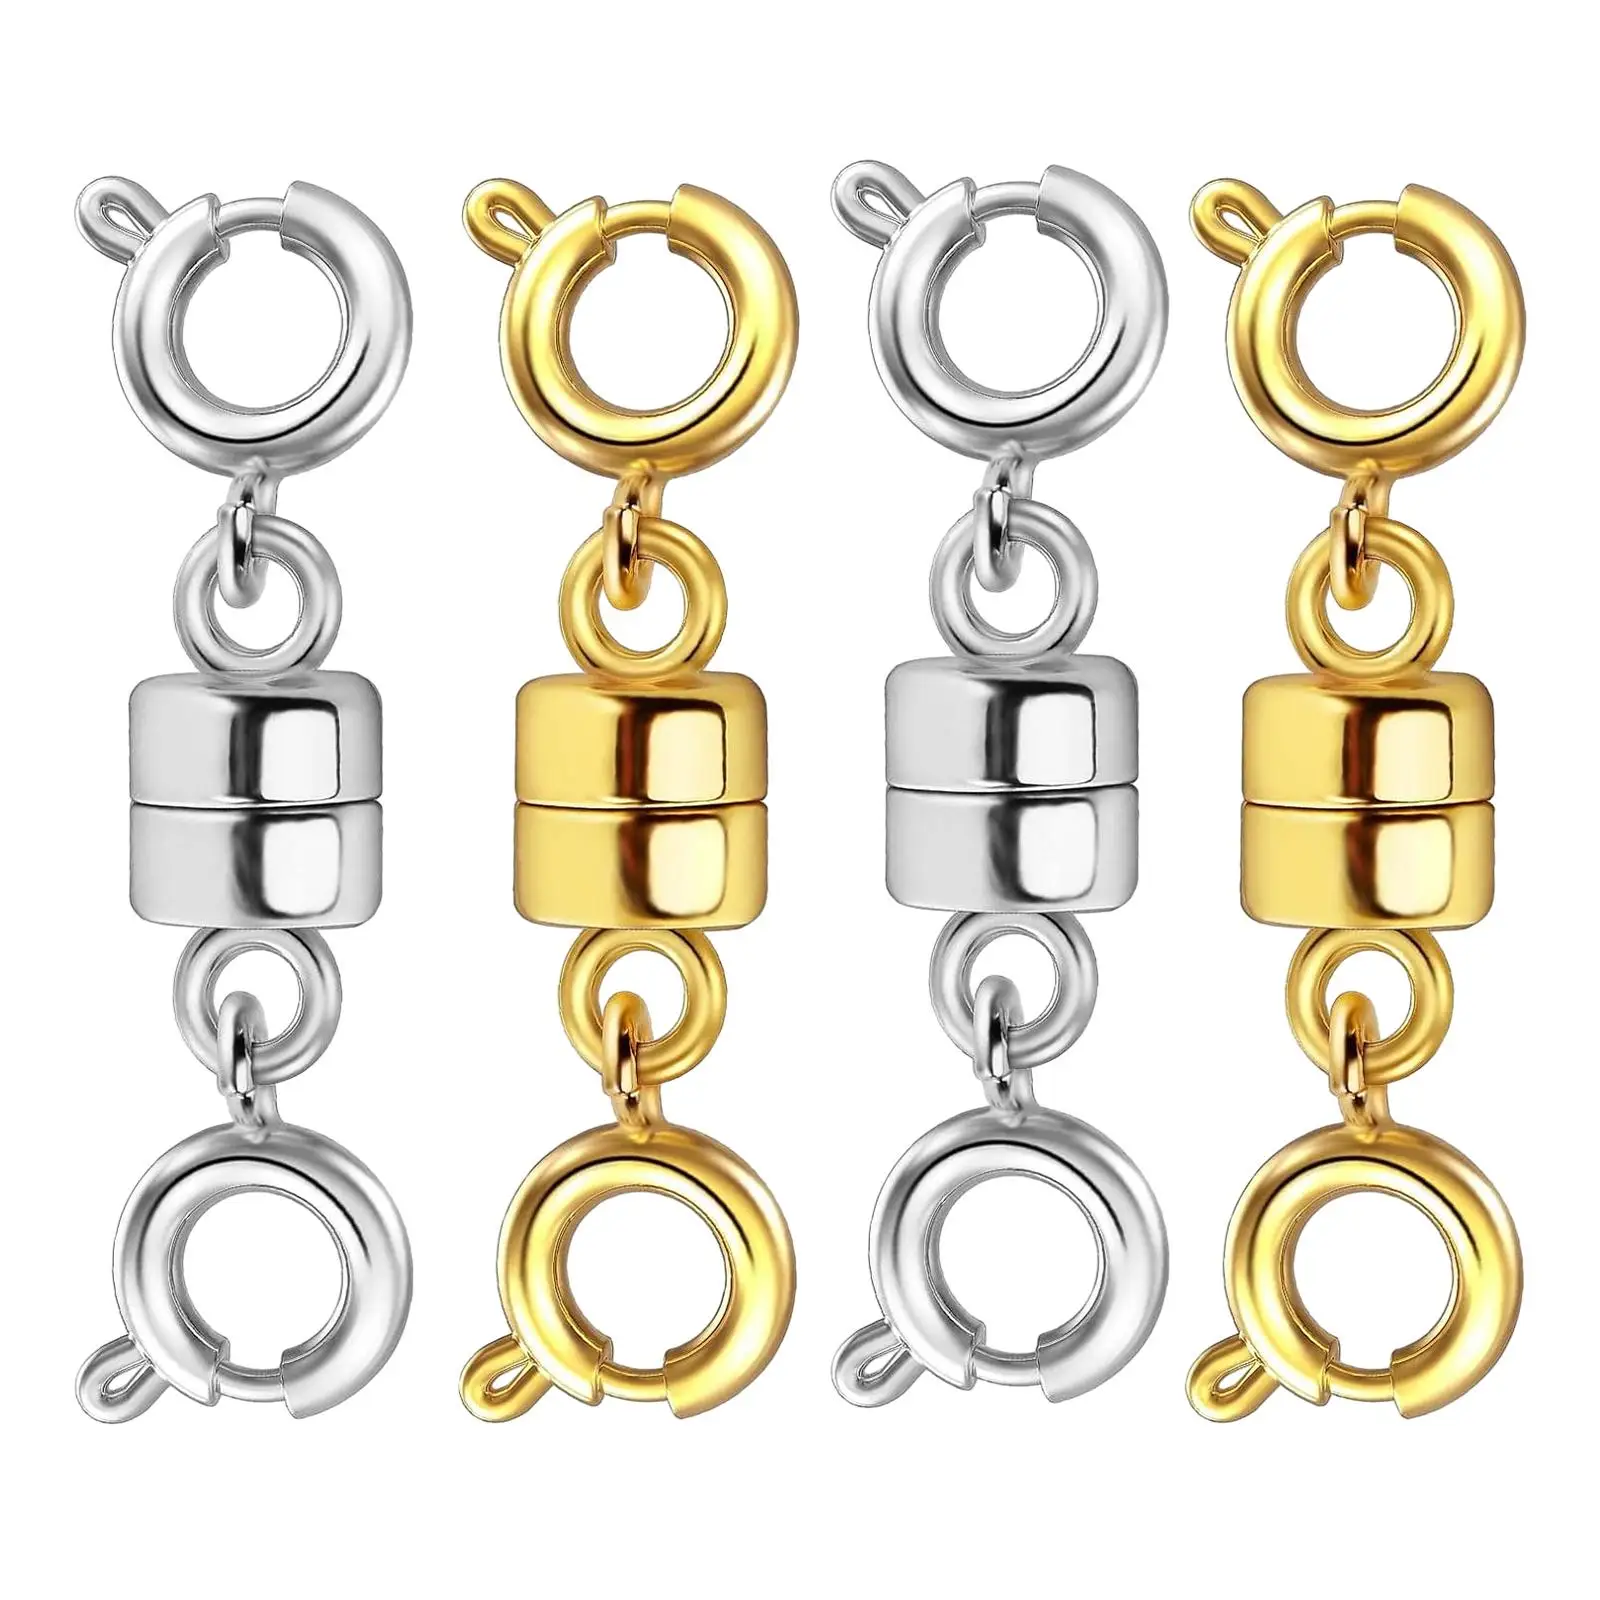 

4x Magnetic Necklace Clasps Closures Gold and Silver Trendy Smooth Surface Sturdy Chain DIY Connector Jewelry Clasps Converters